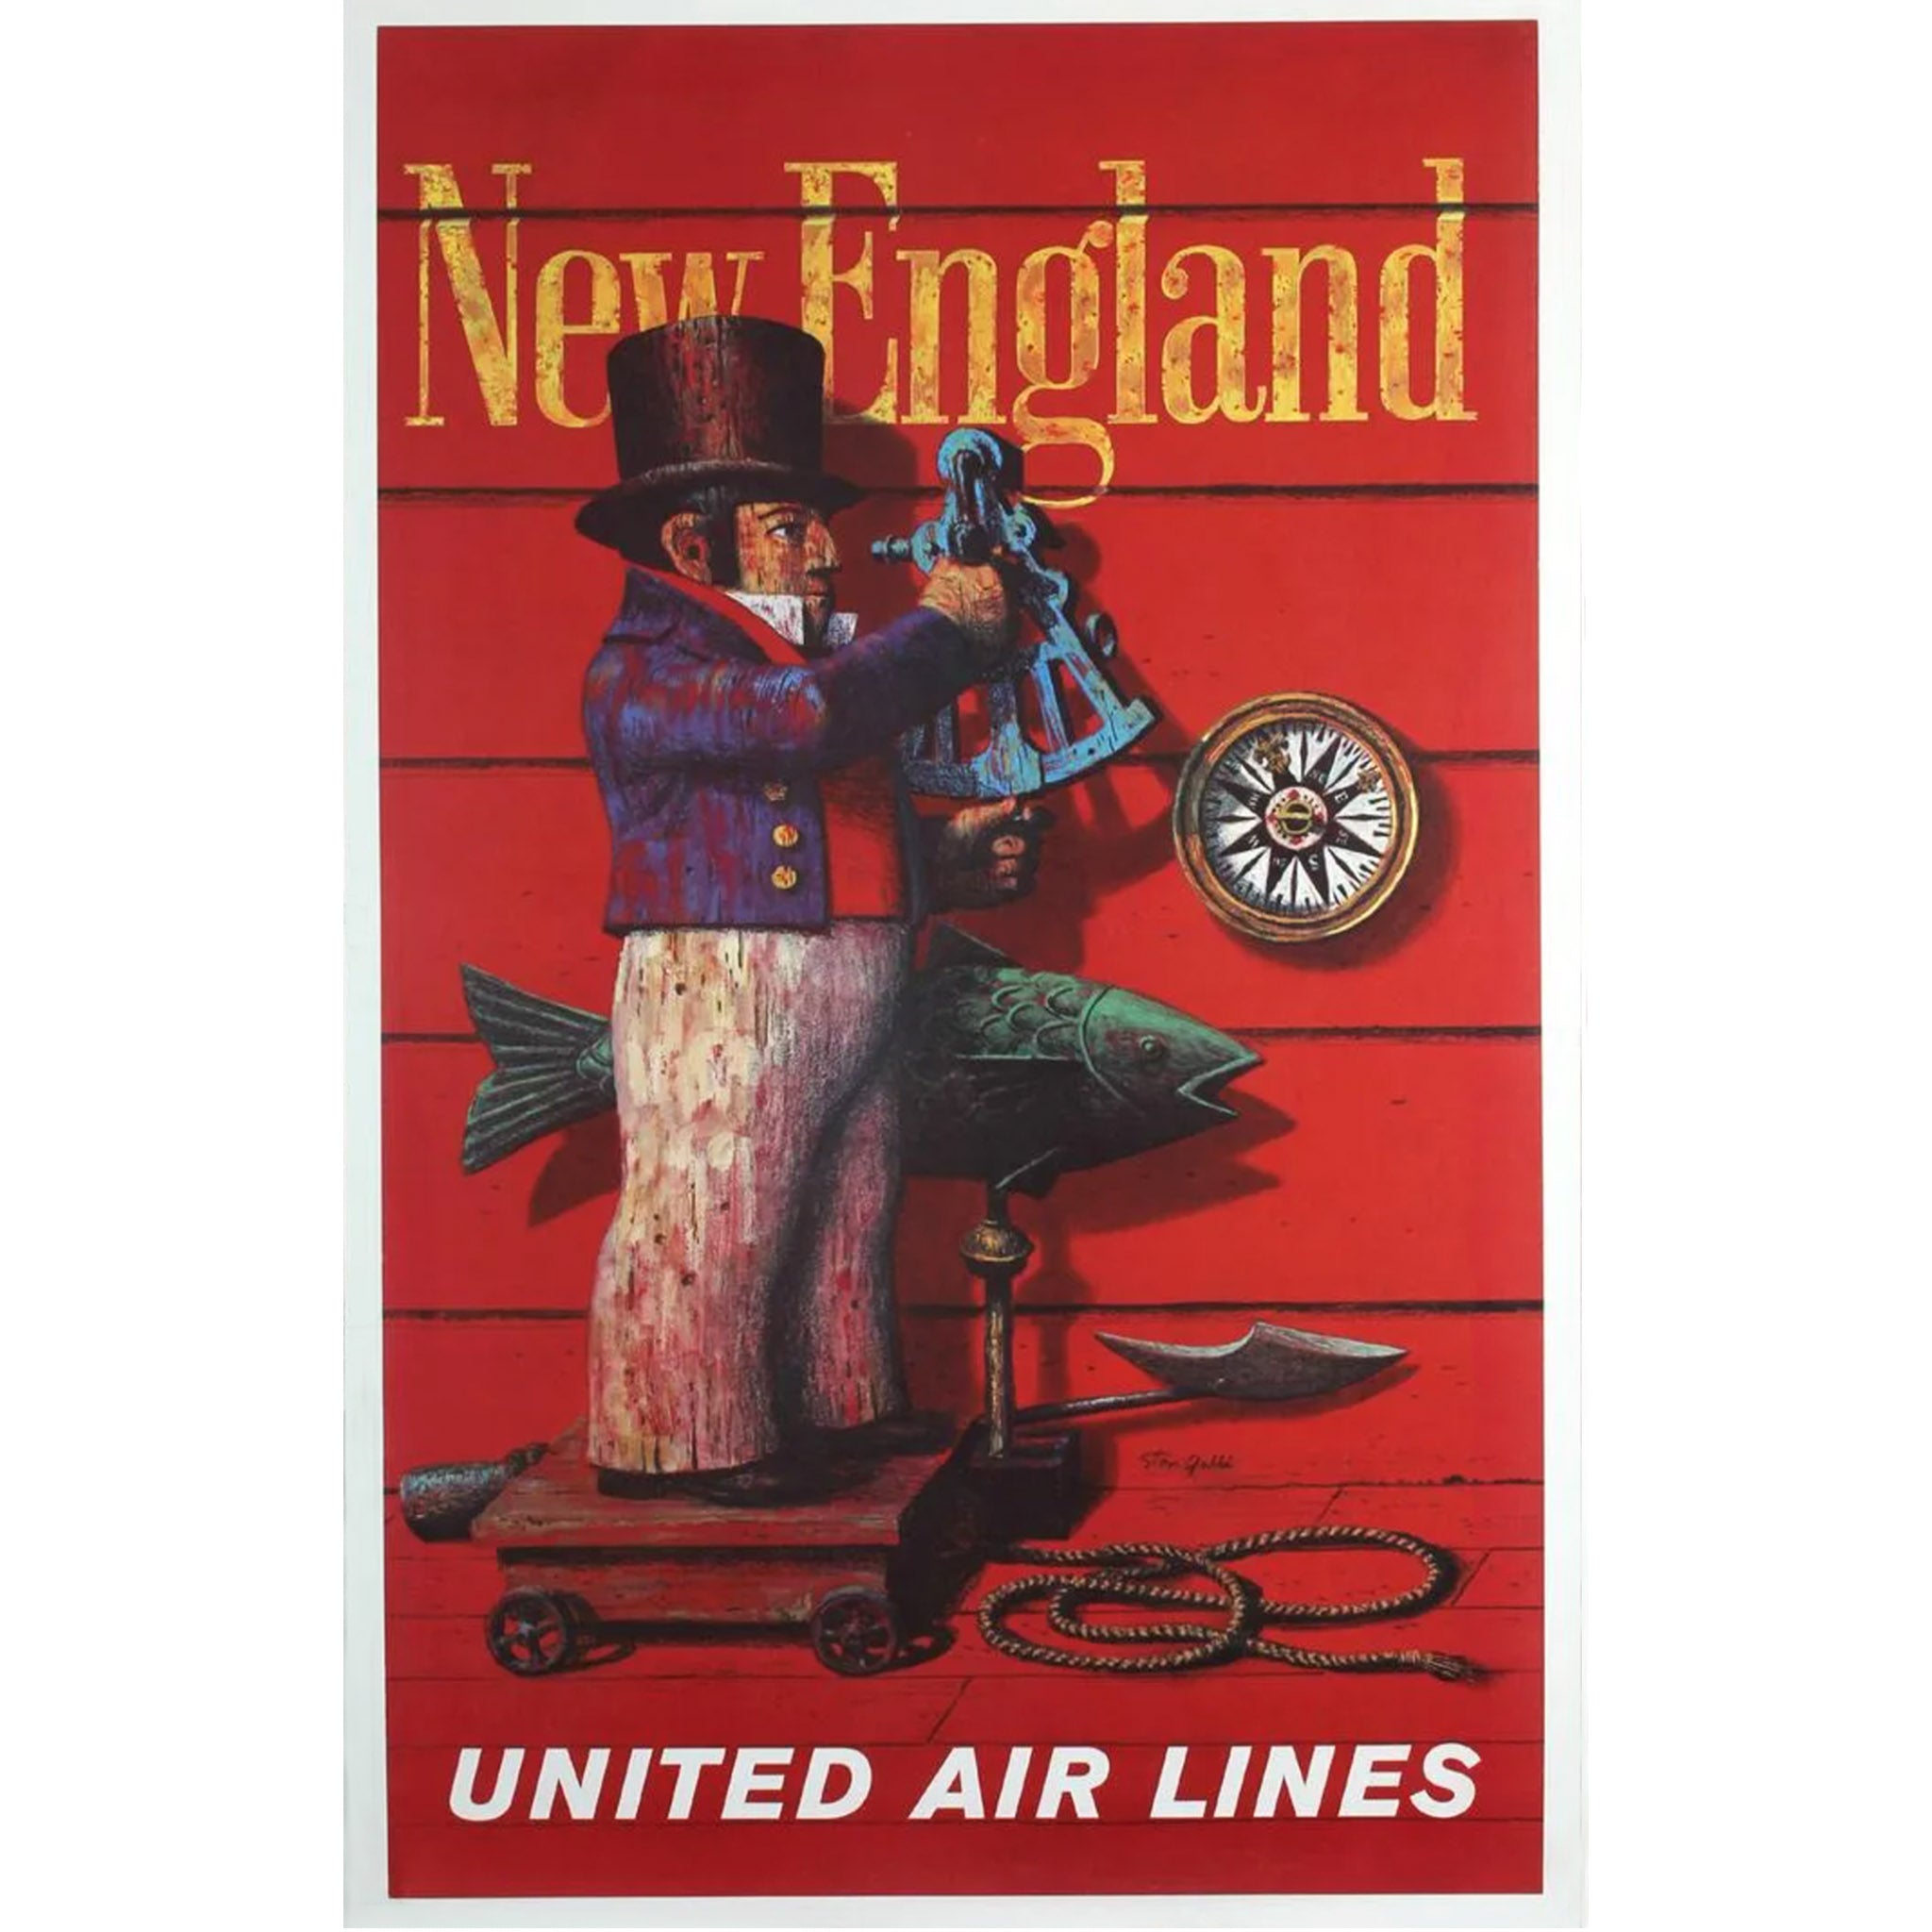 United Air Lines New England Midcentury Travel Poster